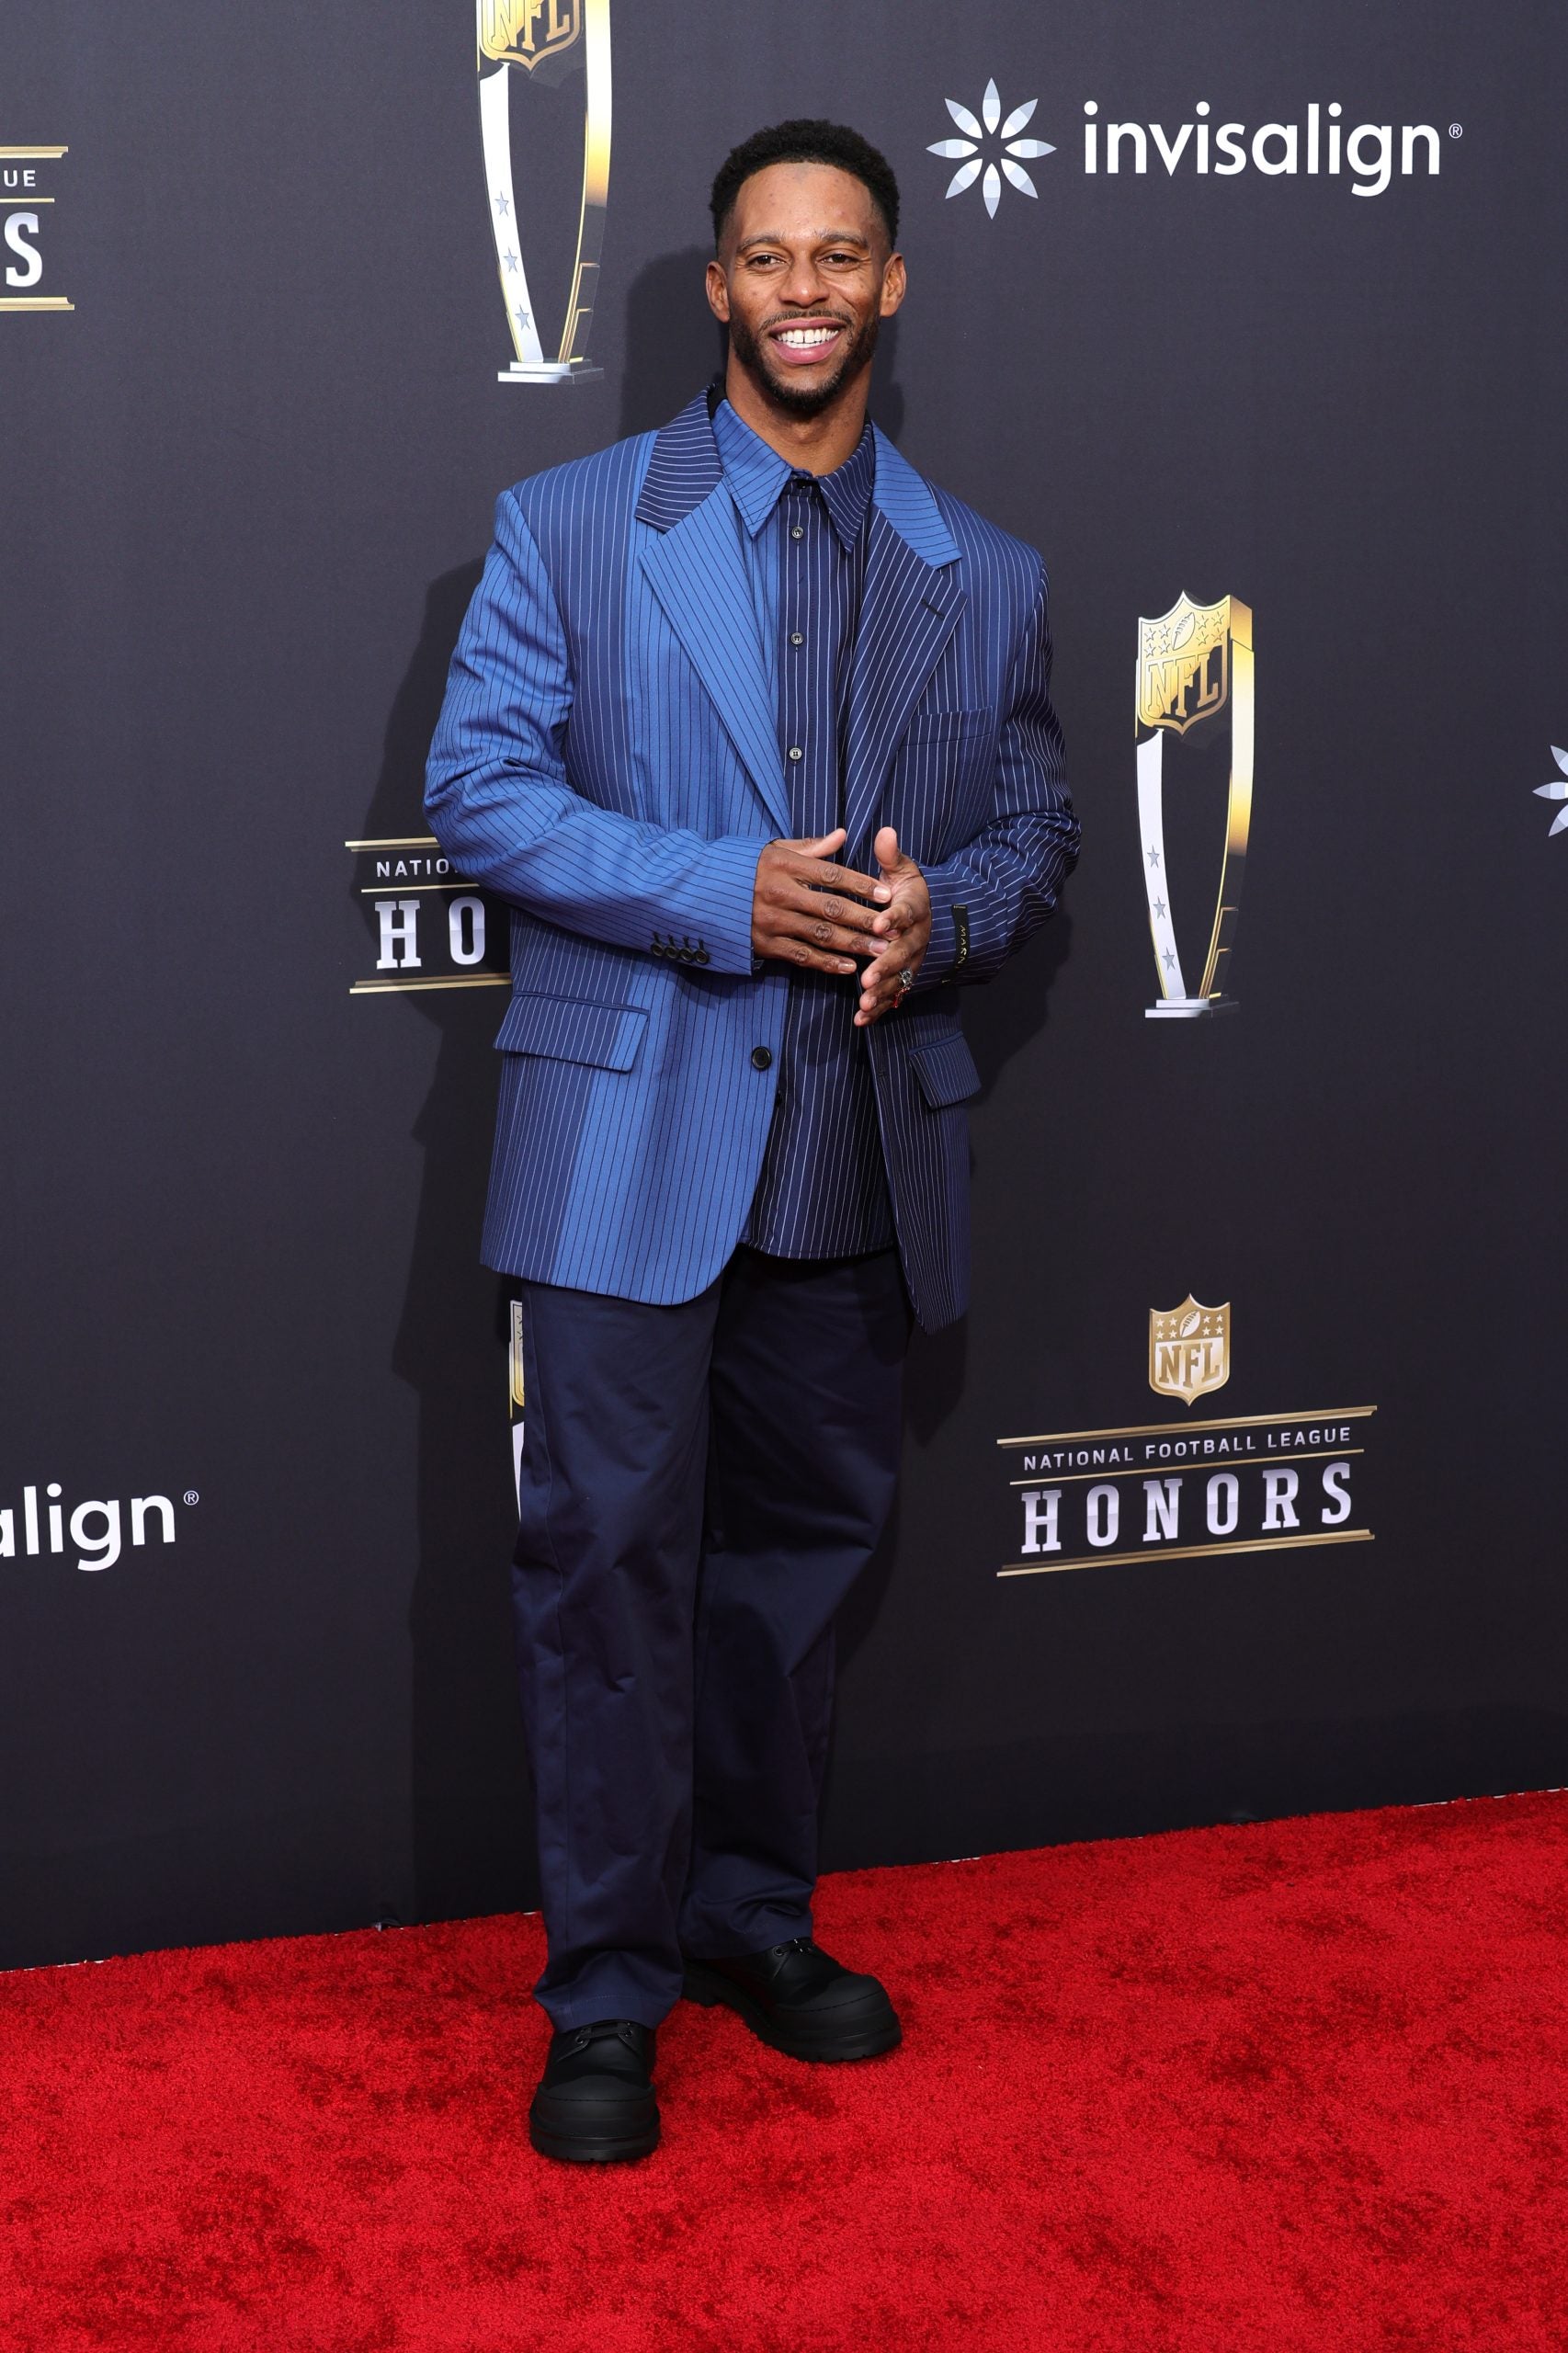 The Best Looks At The 13th Annual NFL Honors